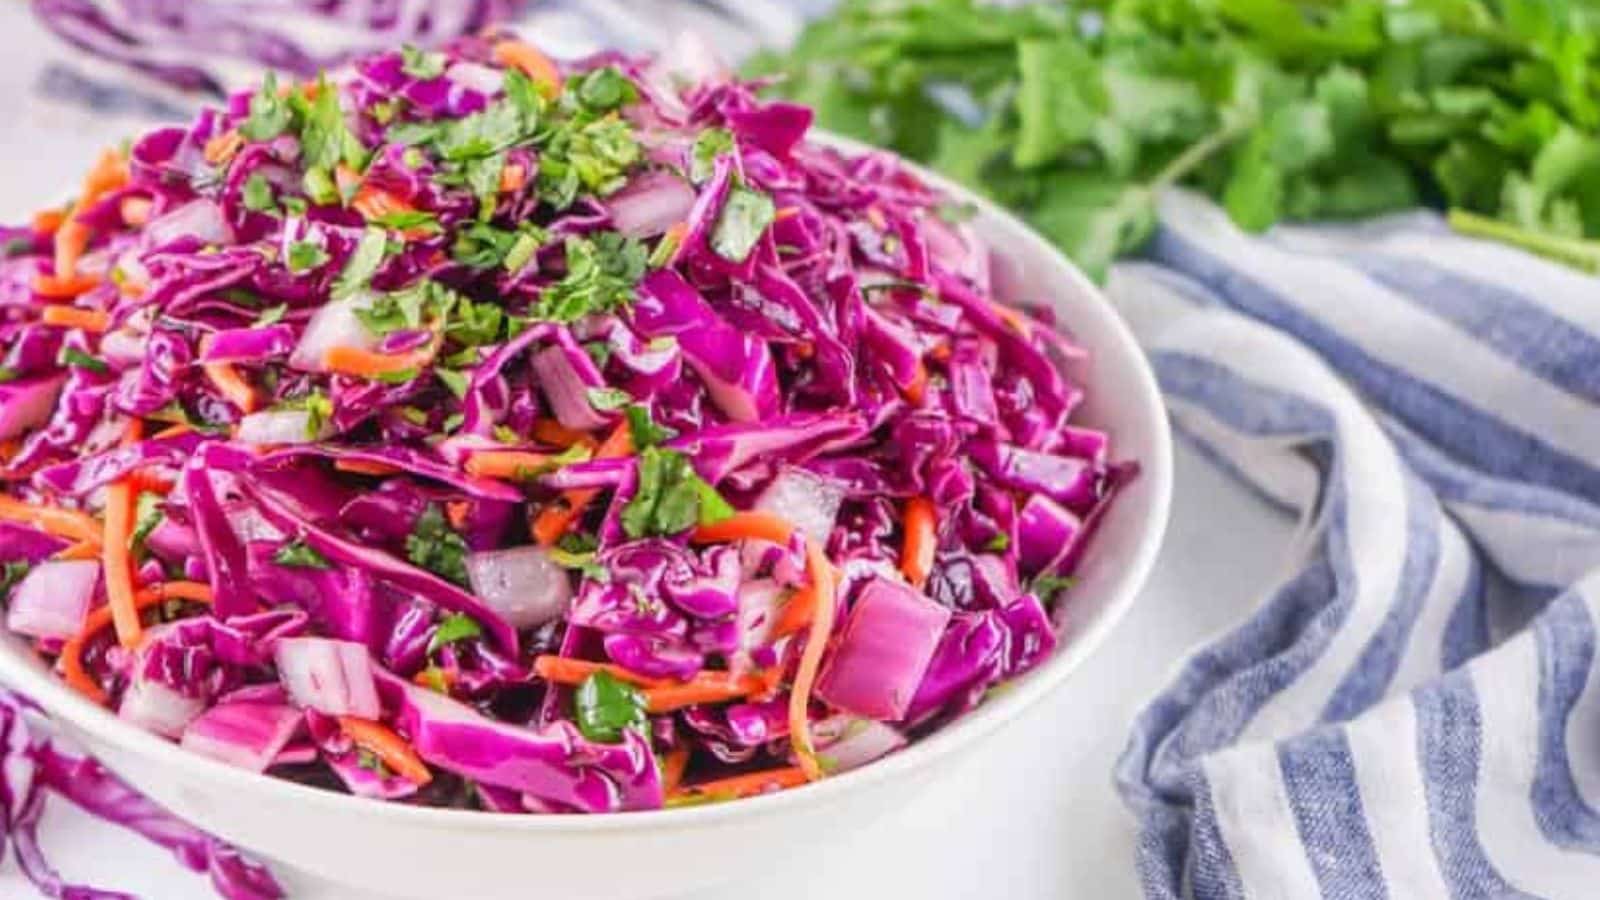 <p>Want to add some color and crunch to your barbecue or picnic spread? This Red Cabbage Coleslaw is the perfect choice! With its crisp texture and tangy dressing, it’s guaranteed to be a hit with your family and friends. <br><strong>Get the Recipe: </strong><a href="https://www.pocketfriendlyrecipes.com/red-cabbage-coleslaw/?utm_source=msn&utm_medium=page&utm_campaign=17%20no-brainer%20recipes%20you'll%20forever%20regret%20overlooking">Red Cabbage Coleslaw</a></p>